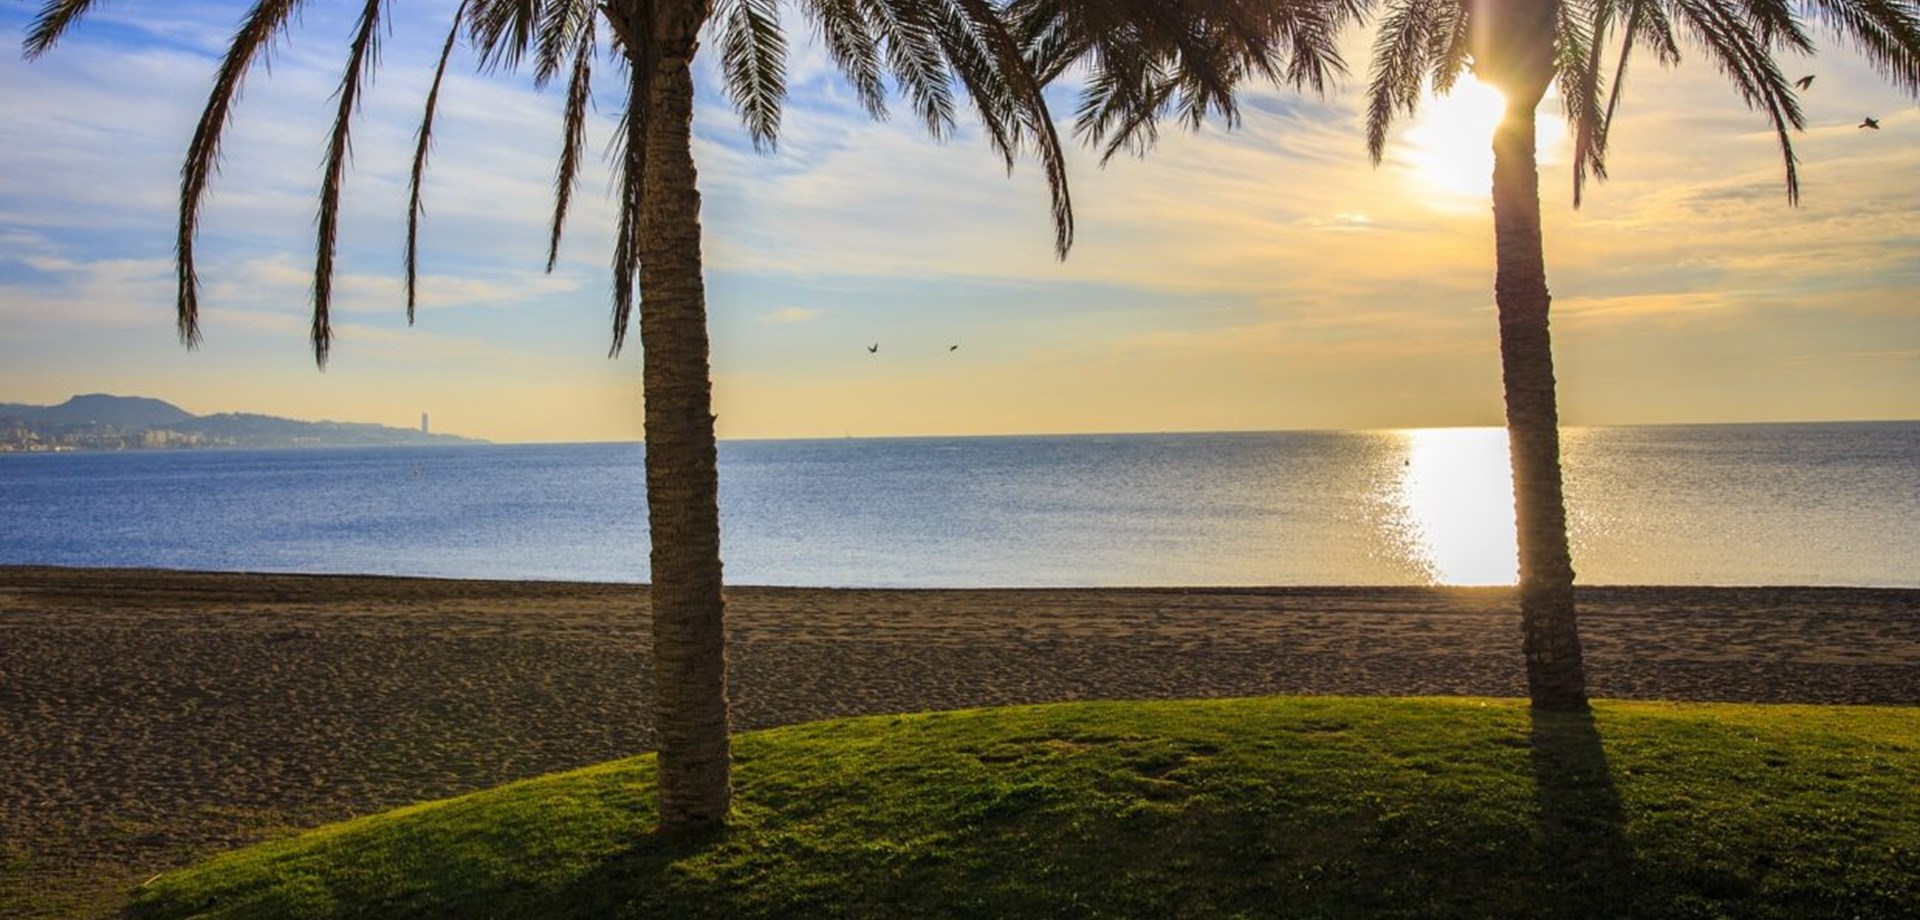 Marbella, Andalusia - High Yield Real Estate Investments